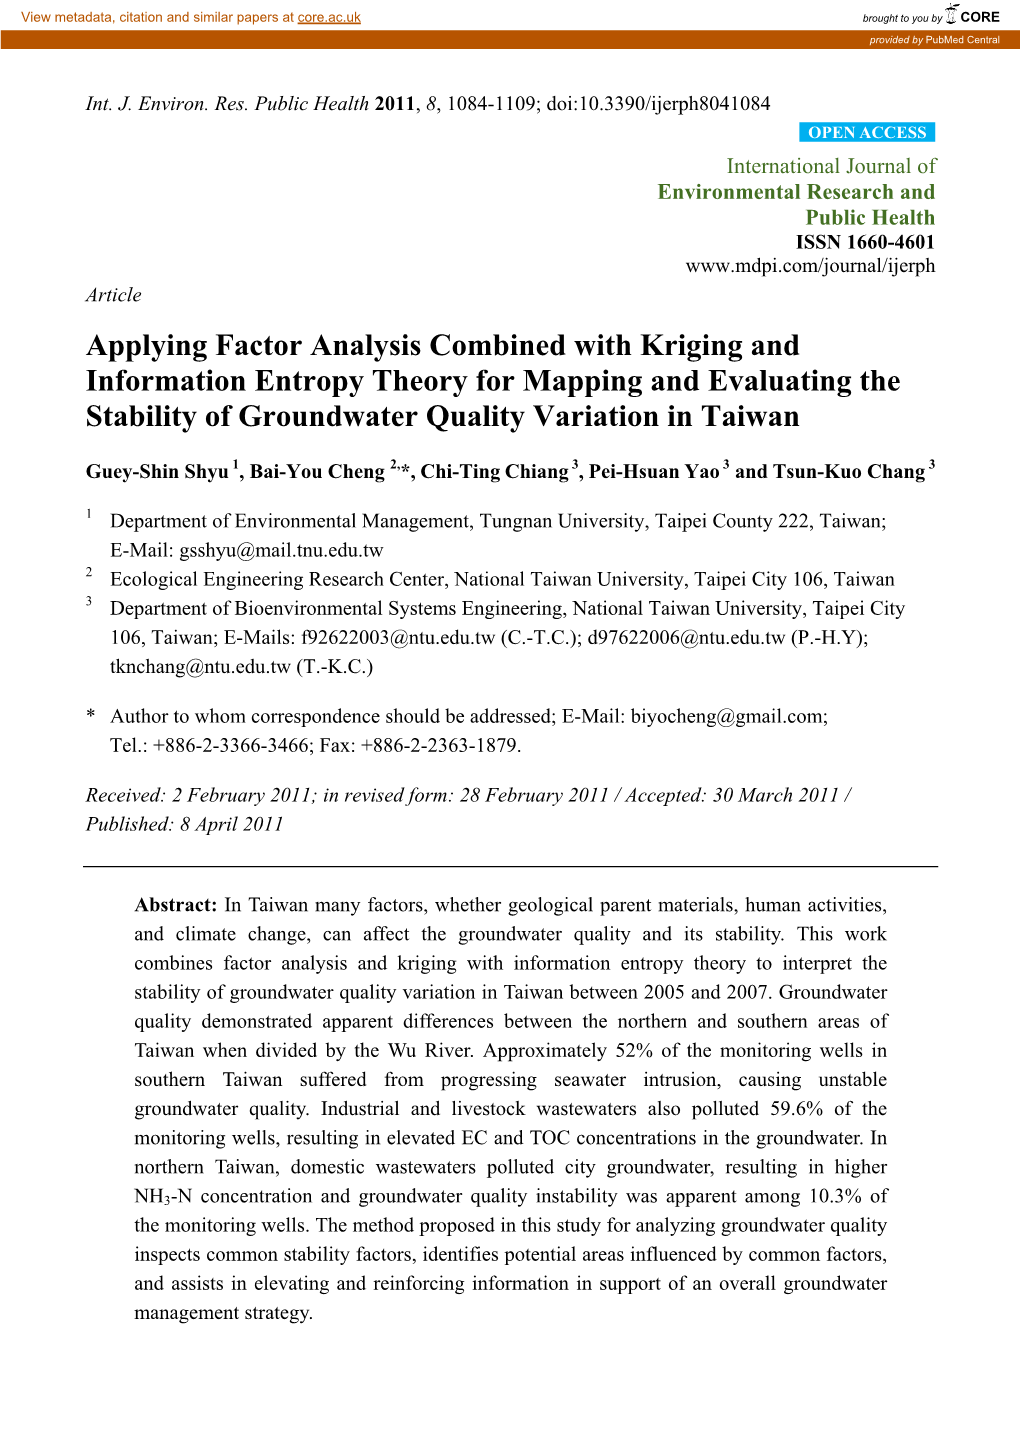 Applying Factor Analysis Combined with Kriging and Information Entropy Theory for Mapping and Evaluating the Stability of Groundwater Quality Variation in Taiwan